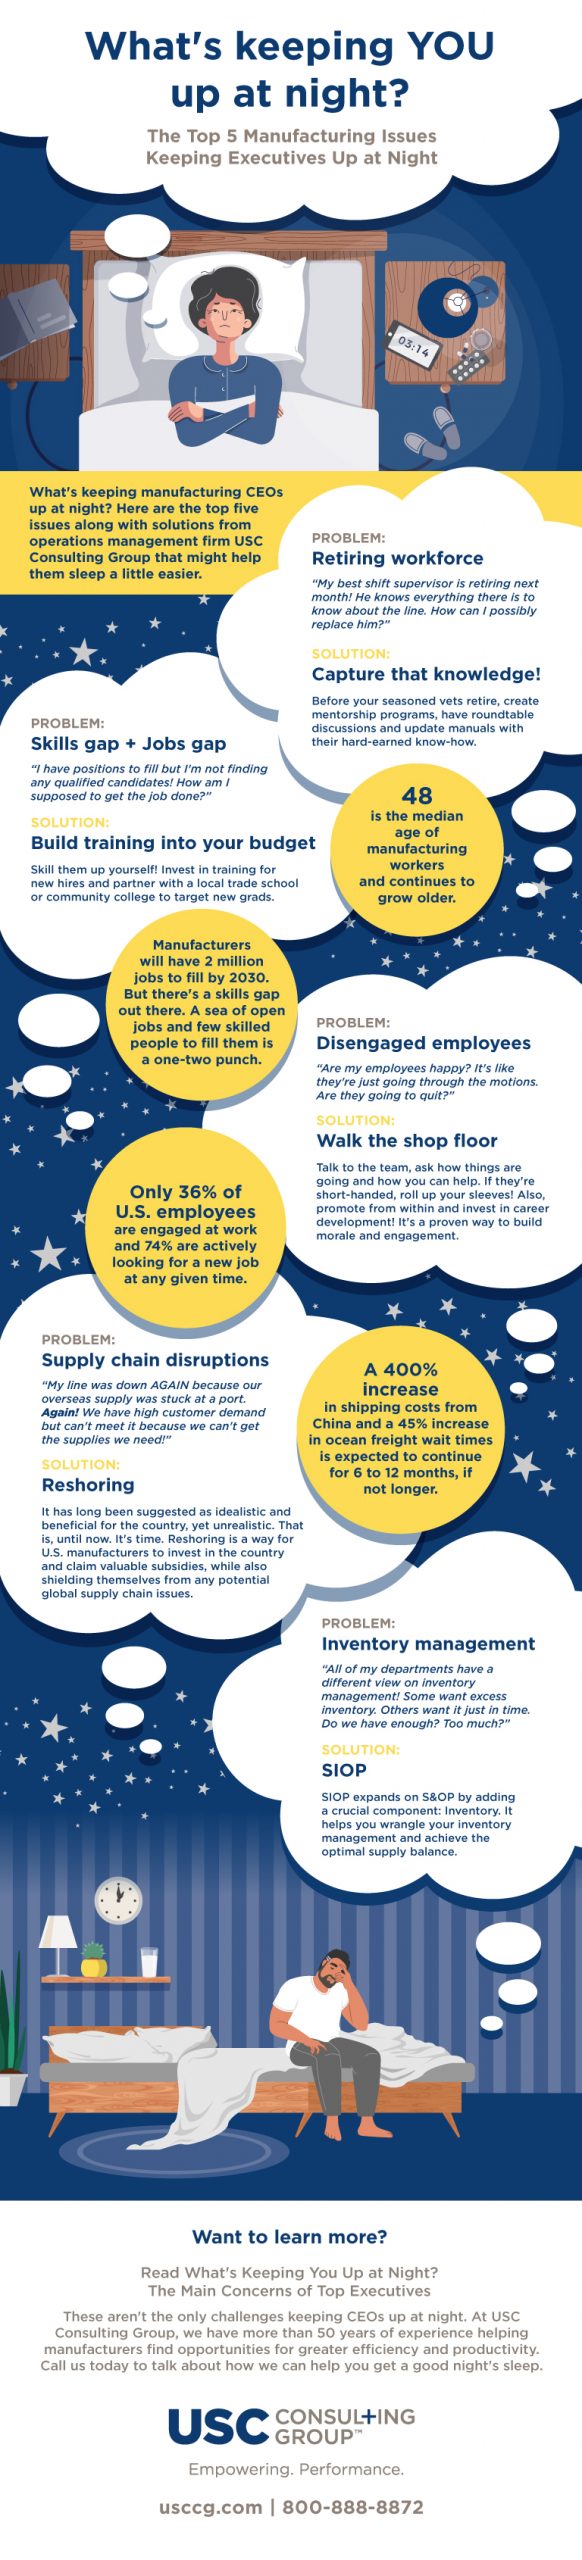 The Top 5 Manufacturing Issues Keeping Executives Up at Night Infographic